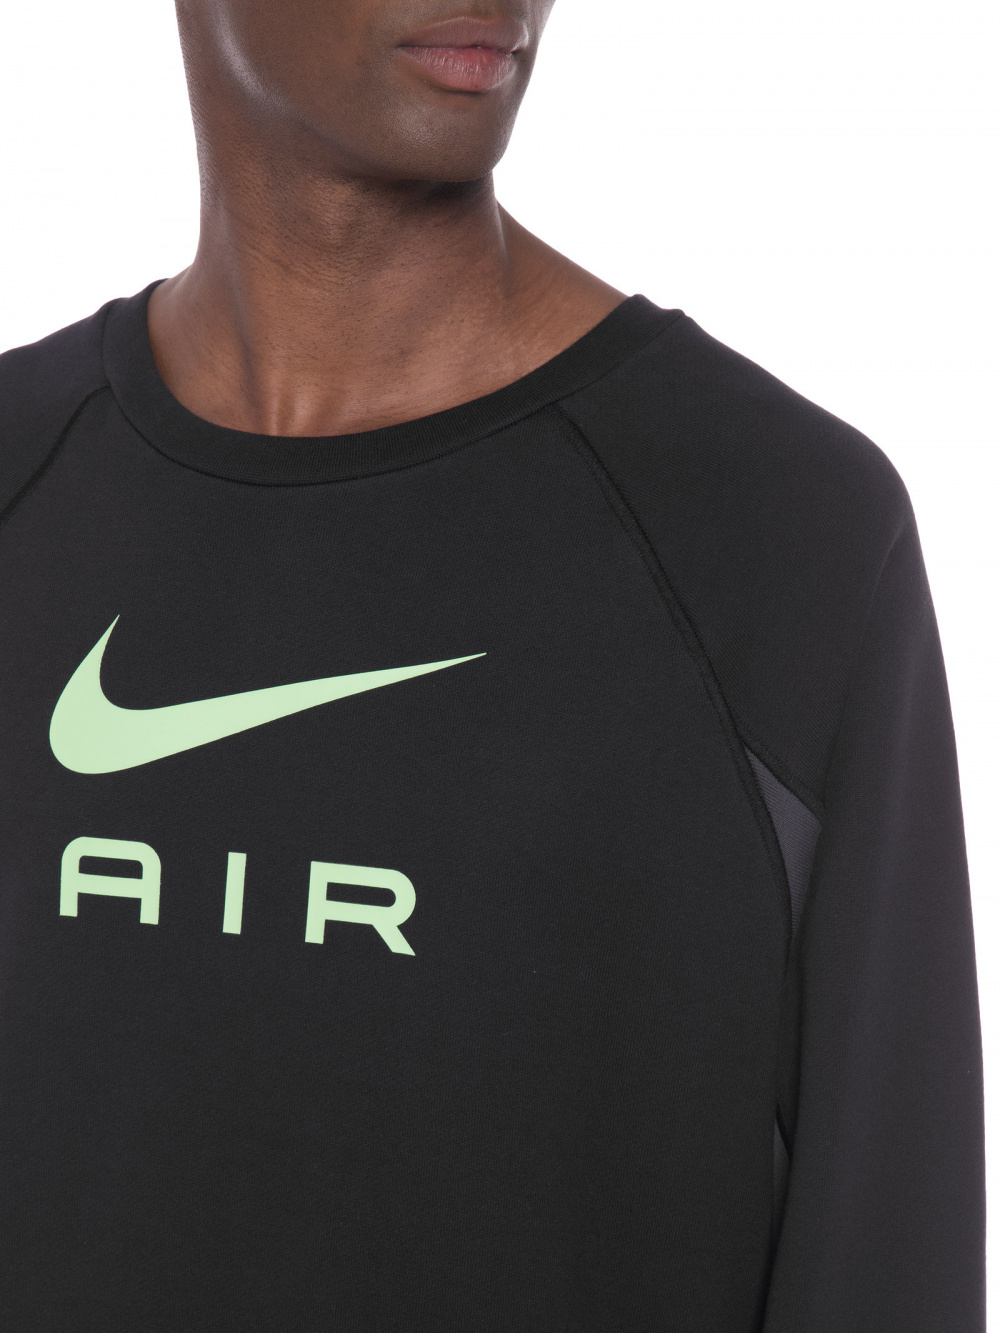 https://images.yampi.me/assets/stores/overhigh/uploads/images/moletom-nike-sportswear-air-ft-g-647b6c38f18a8-large.JPG